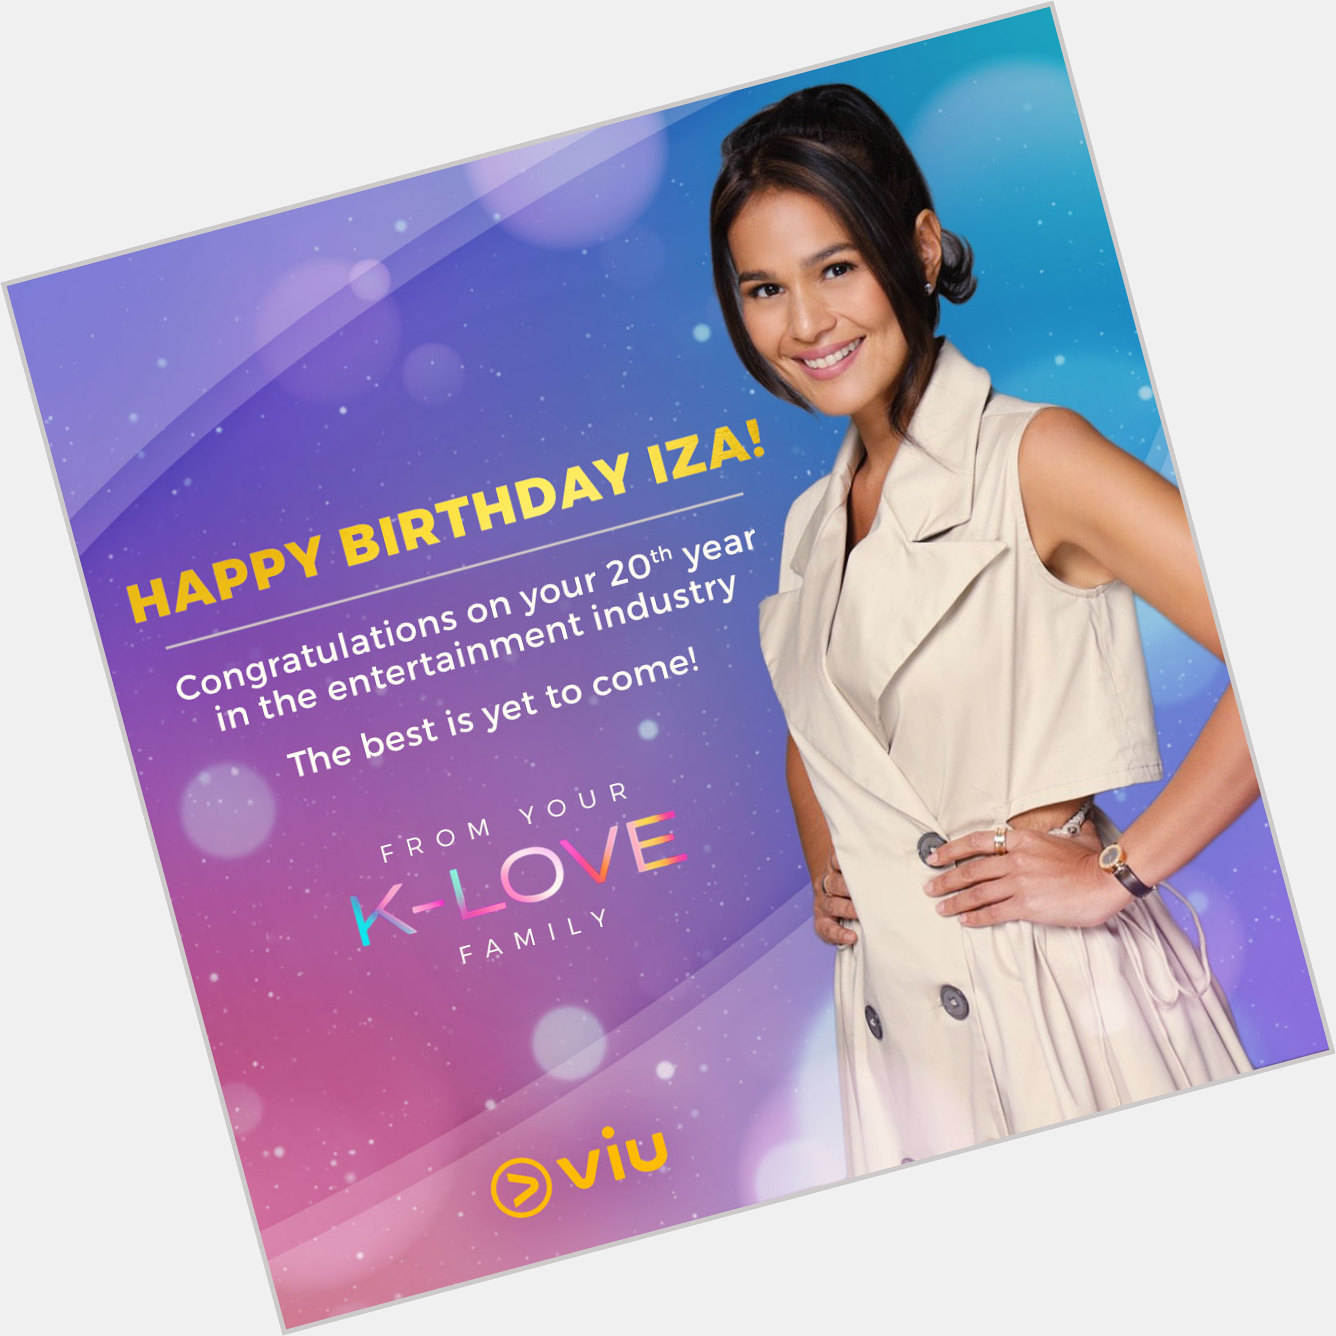 Happy Birthday to our Tish - Iza Calzado! Watch her be the ultimate girlboss in K-Love, streaming soon on Viu! 